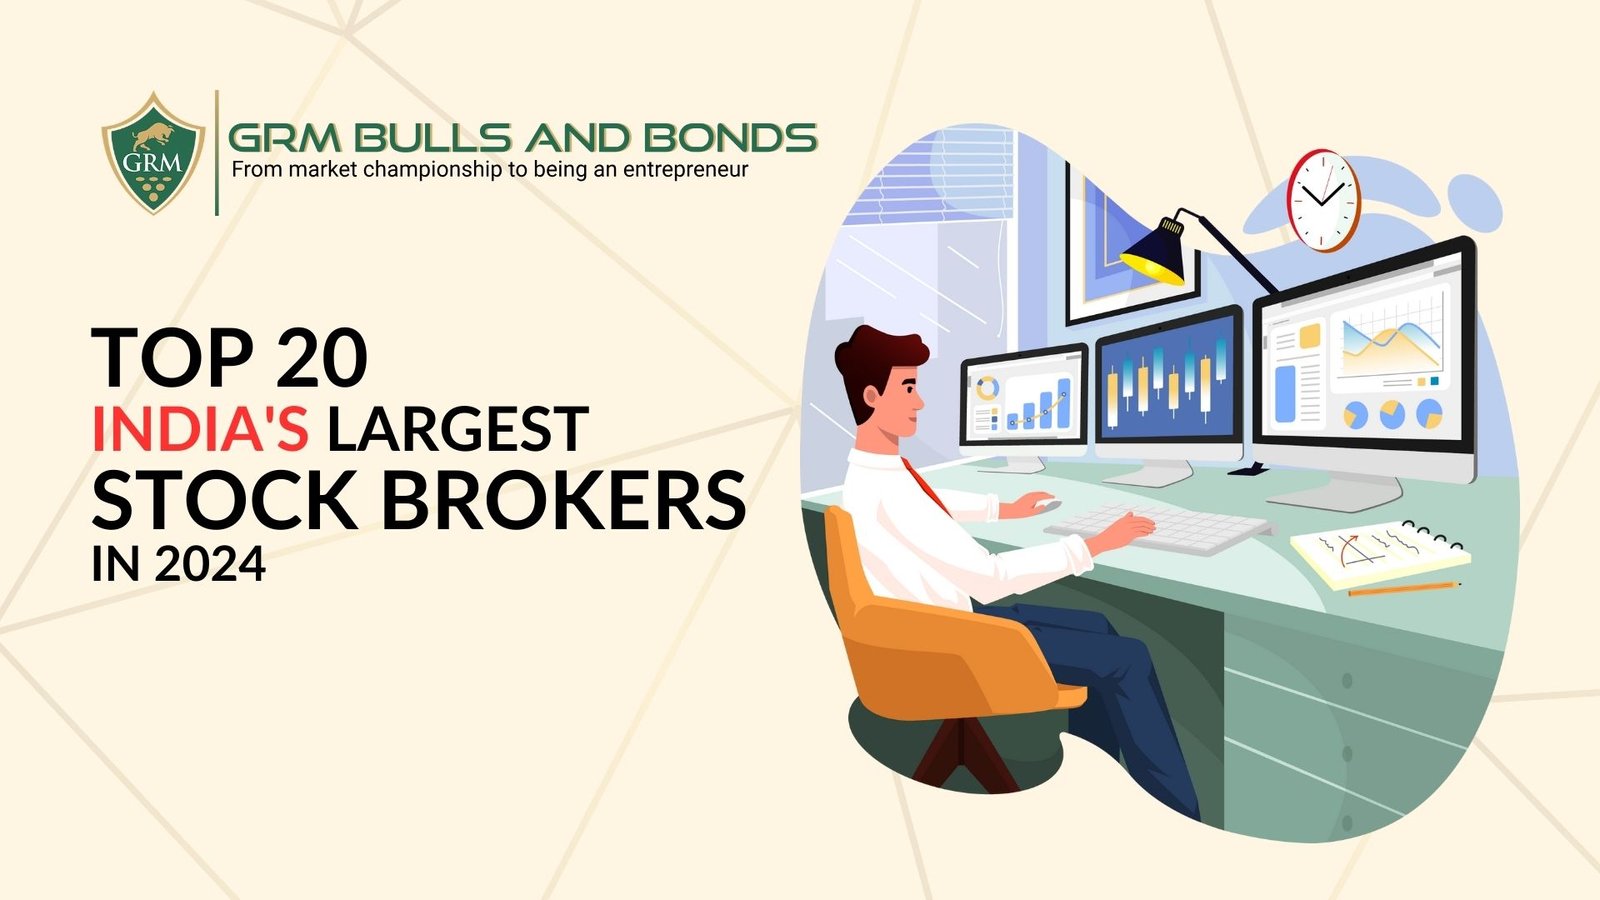 Top 20 India’s Largest Stock Brokers in 2024